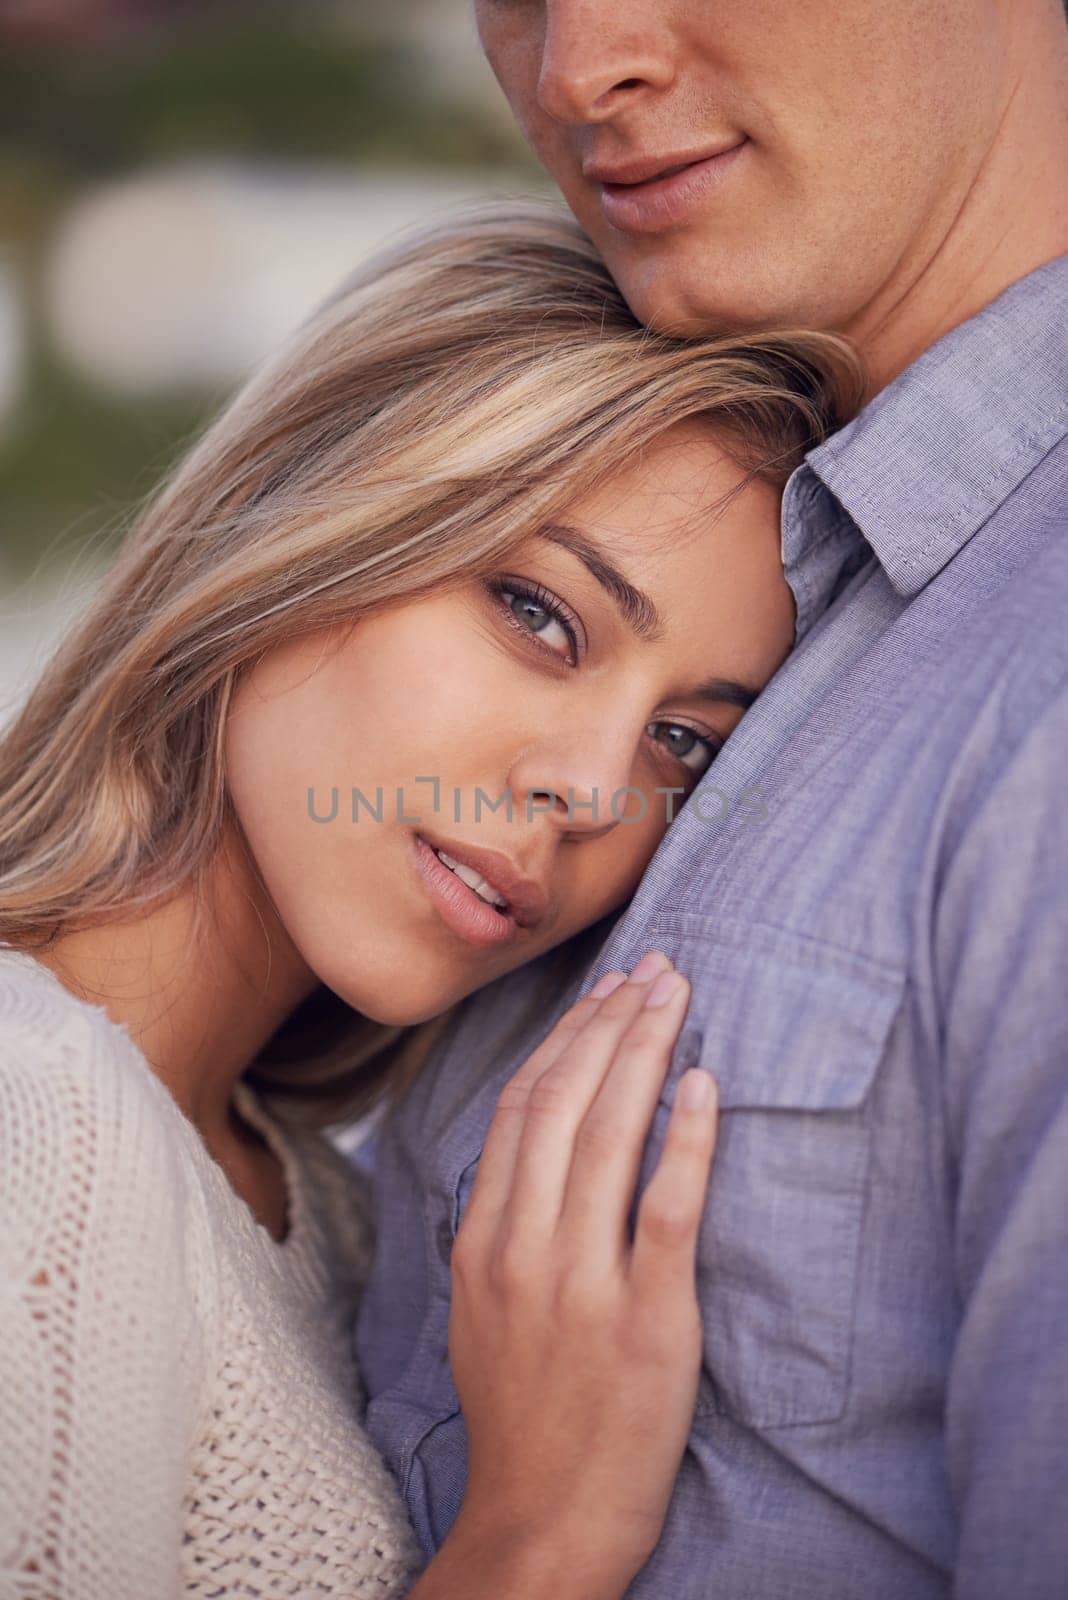 Couple, portrait and hug by outdoor beach, commitment and peace for romance in relationship. People, closeup and security in marriage, embrace and travel on vacation or holiday for bonding in nature.